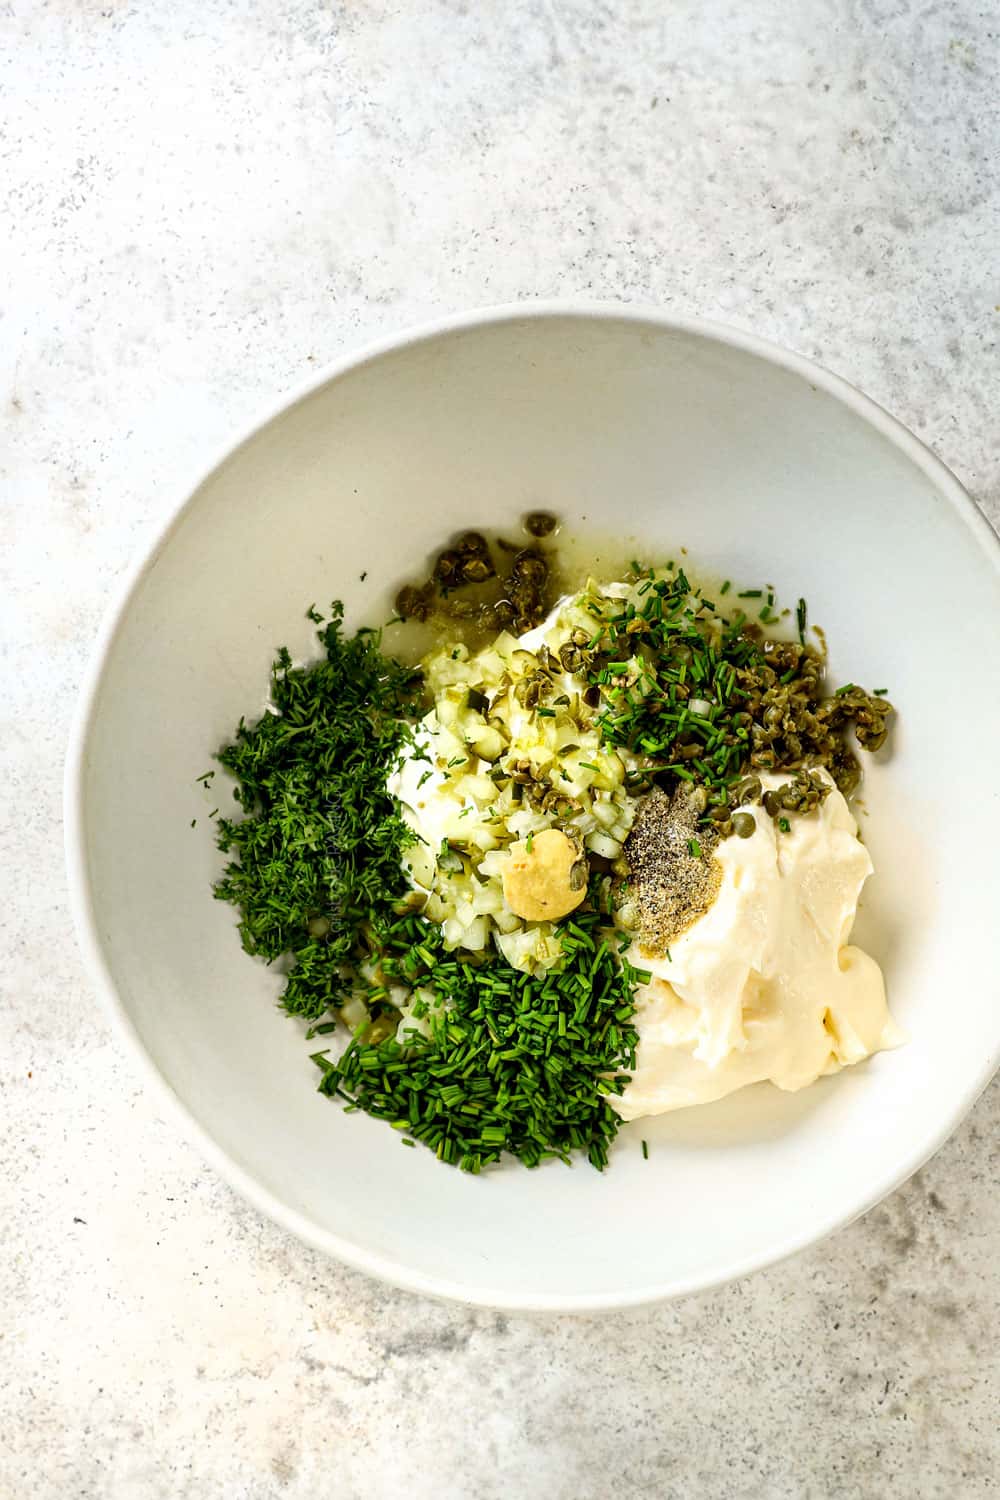 showing ingredients in tartar sauce by adding mayonnaise, diced pickle, diced capers, chopped dill, and lemon juice to a white bowl